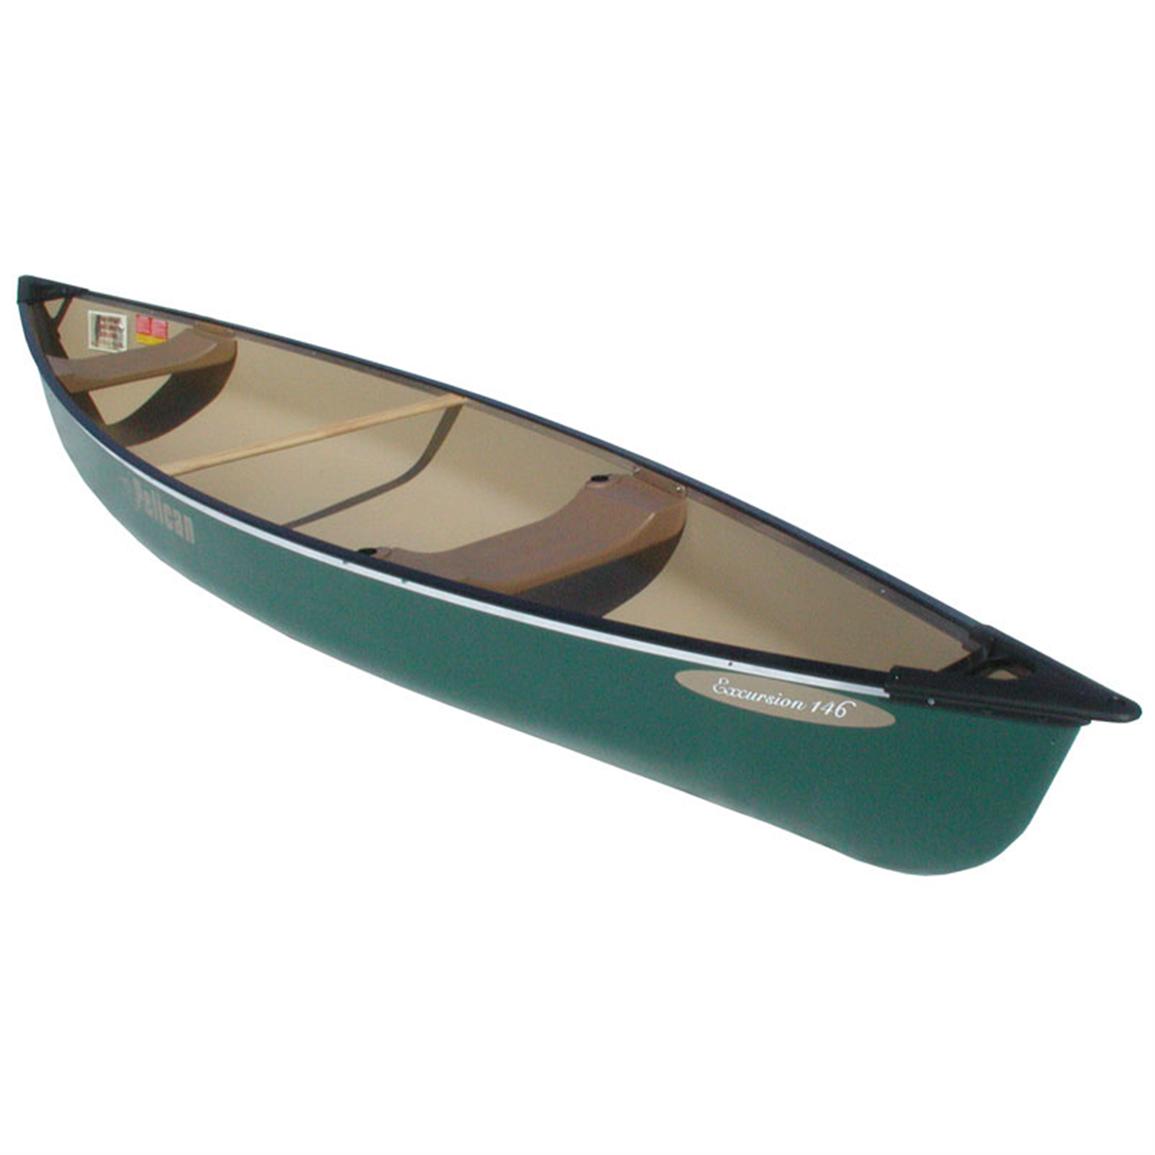 Pelican® Excursion 146 Canoe - 88261, Canoes & Kayaks at Sportsman's Guide1155 x 1155